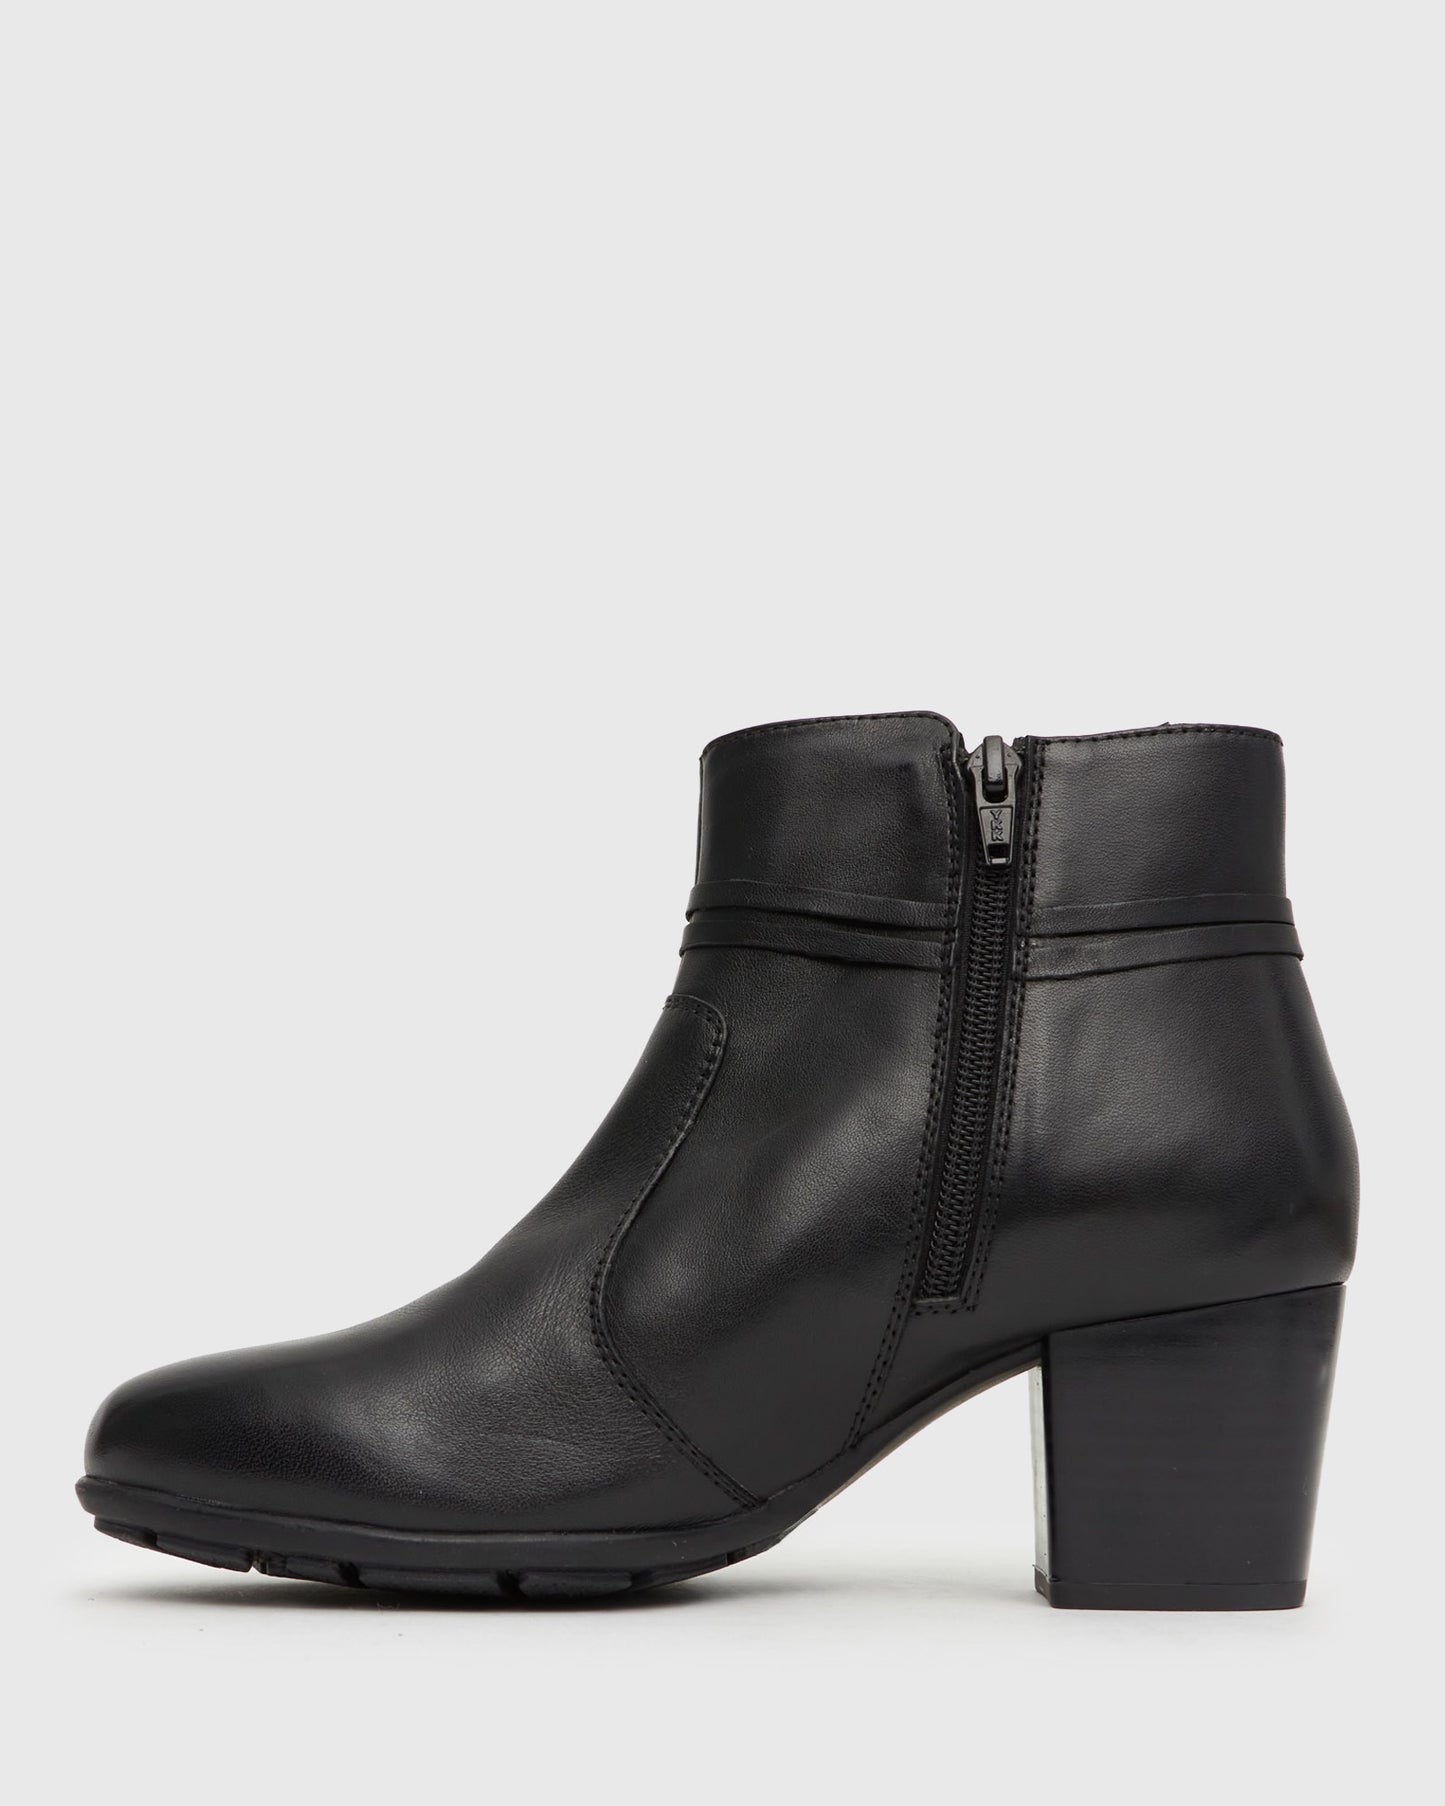 GEORGIE Leather Heeled Ankle Boots